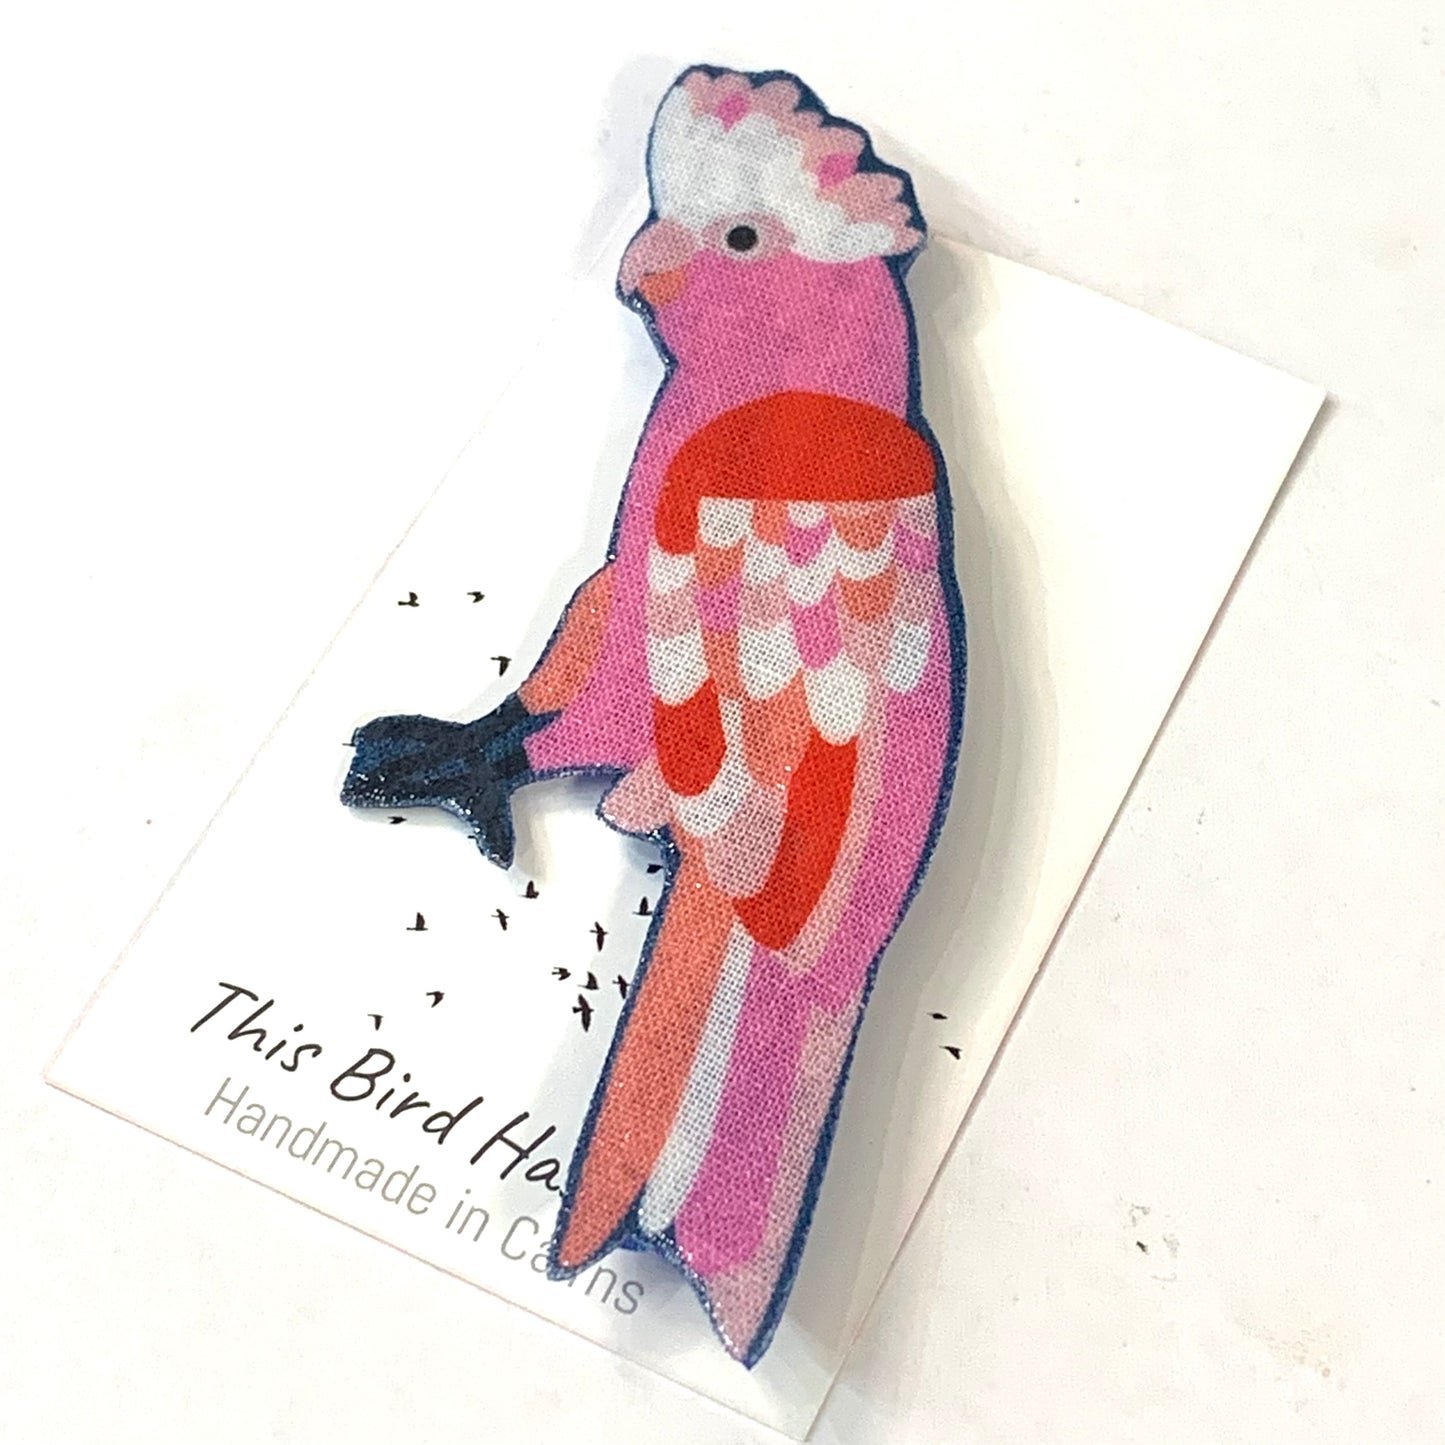 THIS BIRD HAS FLOWN- Fabric Remnant Brooches- Proust Galah